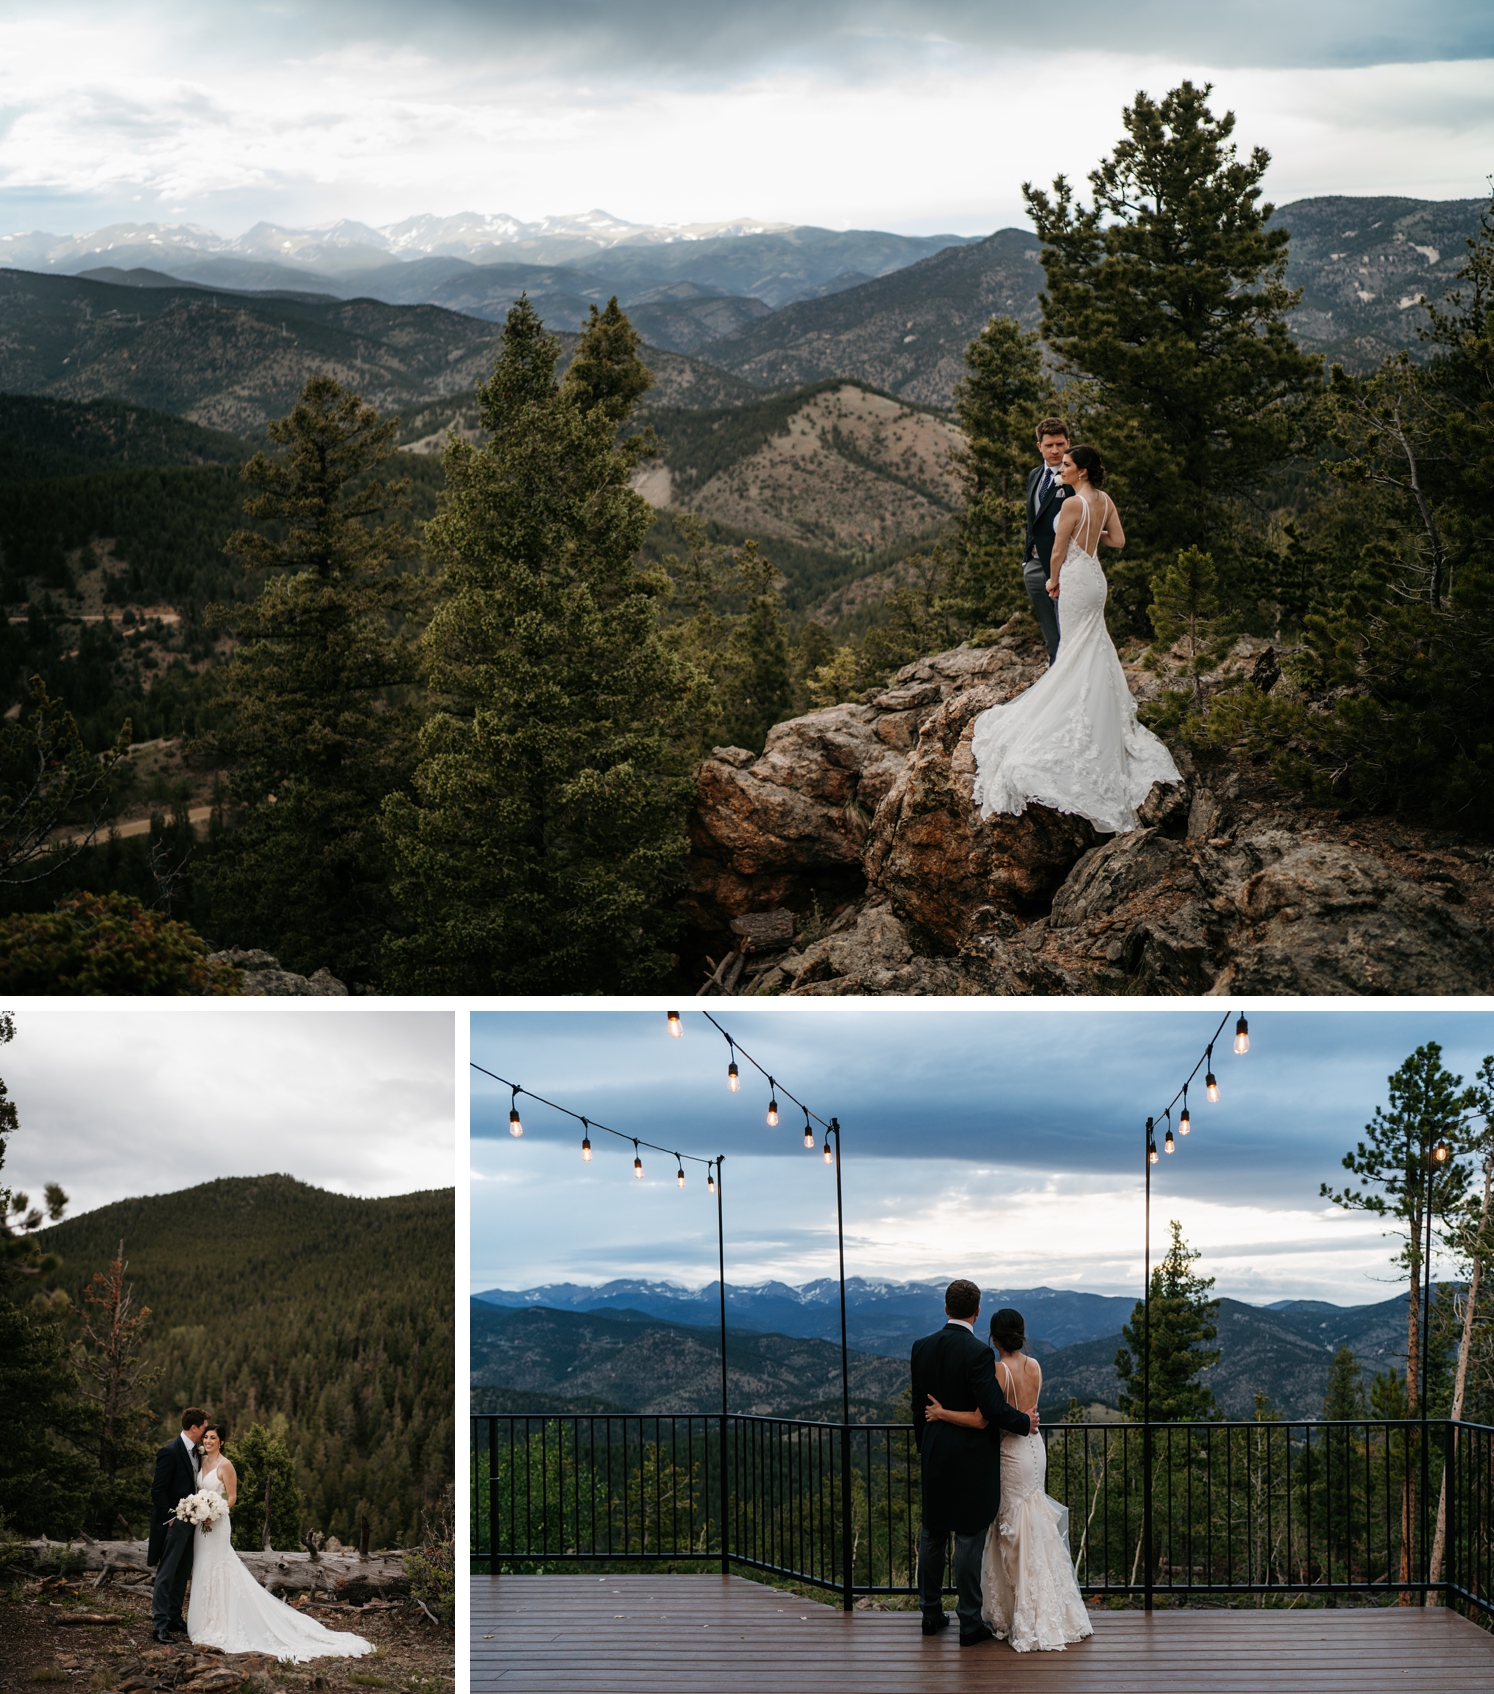 Bride and groom posing in front of mountains at North Star Gatherings | bride and groom posing in front of trees | bride and groom standing on deck overlooking mountains at North Star Gatherings | McArthur Weddings and Events